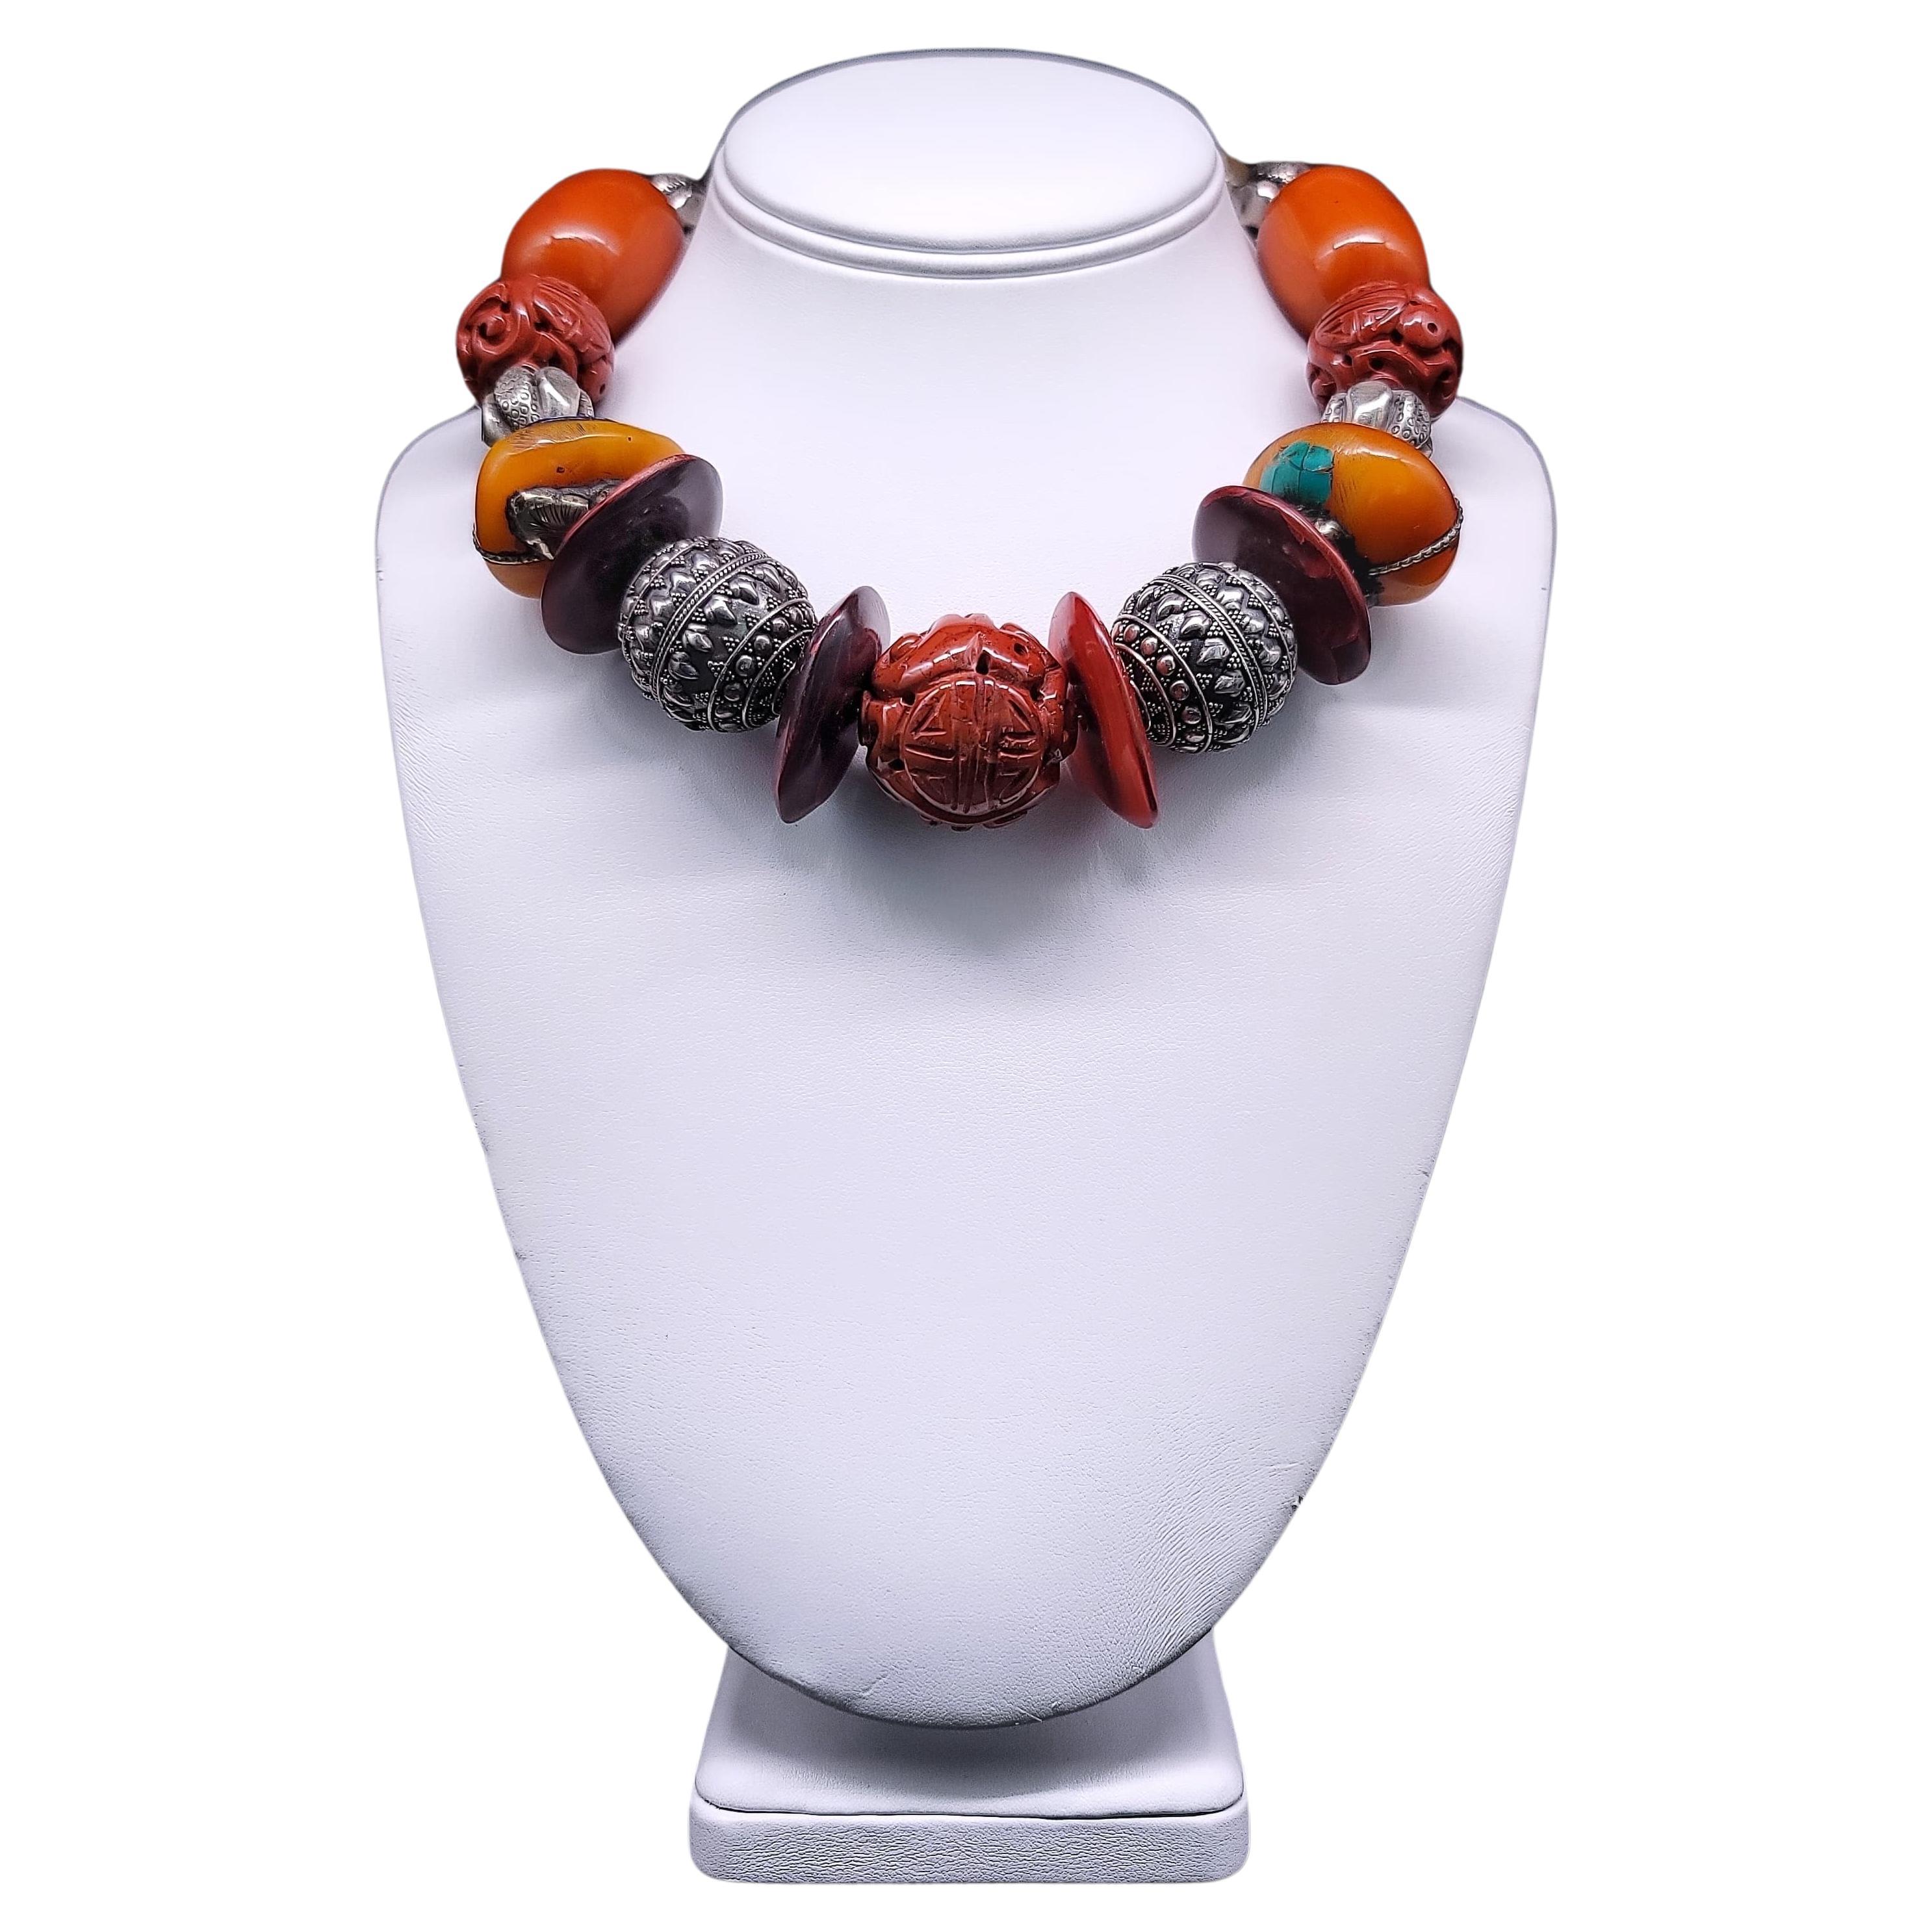 A.Jeschel Tibetan Amber necklace with Carved Ceramic.